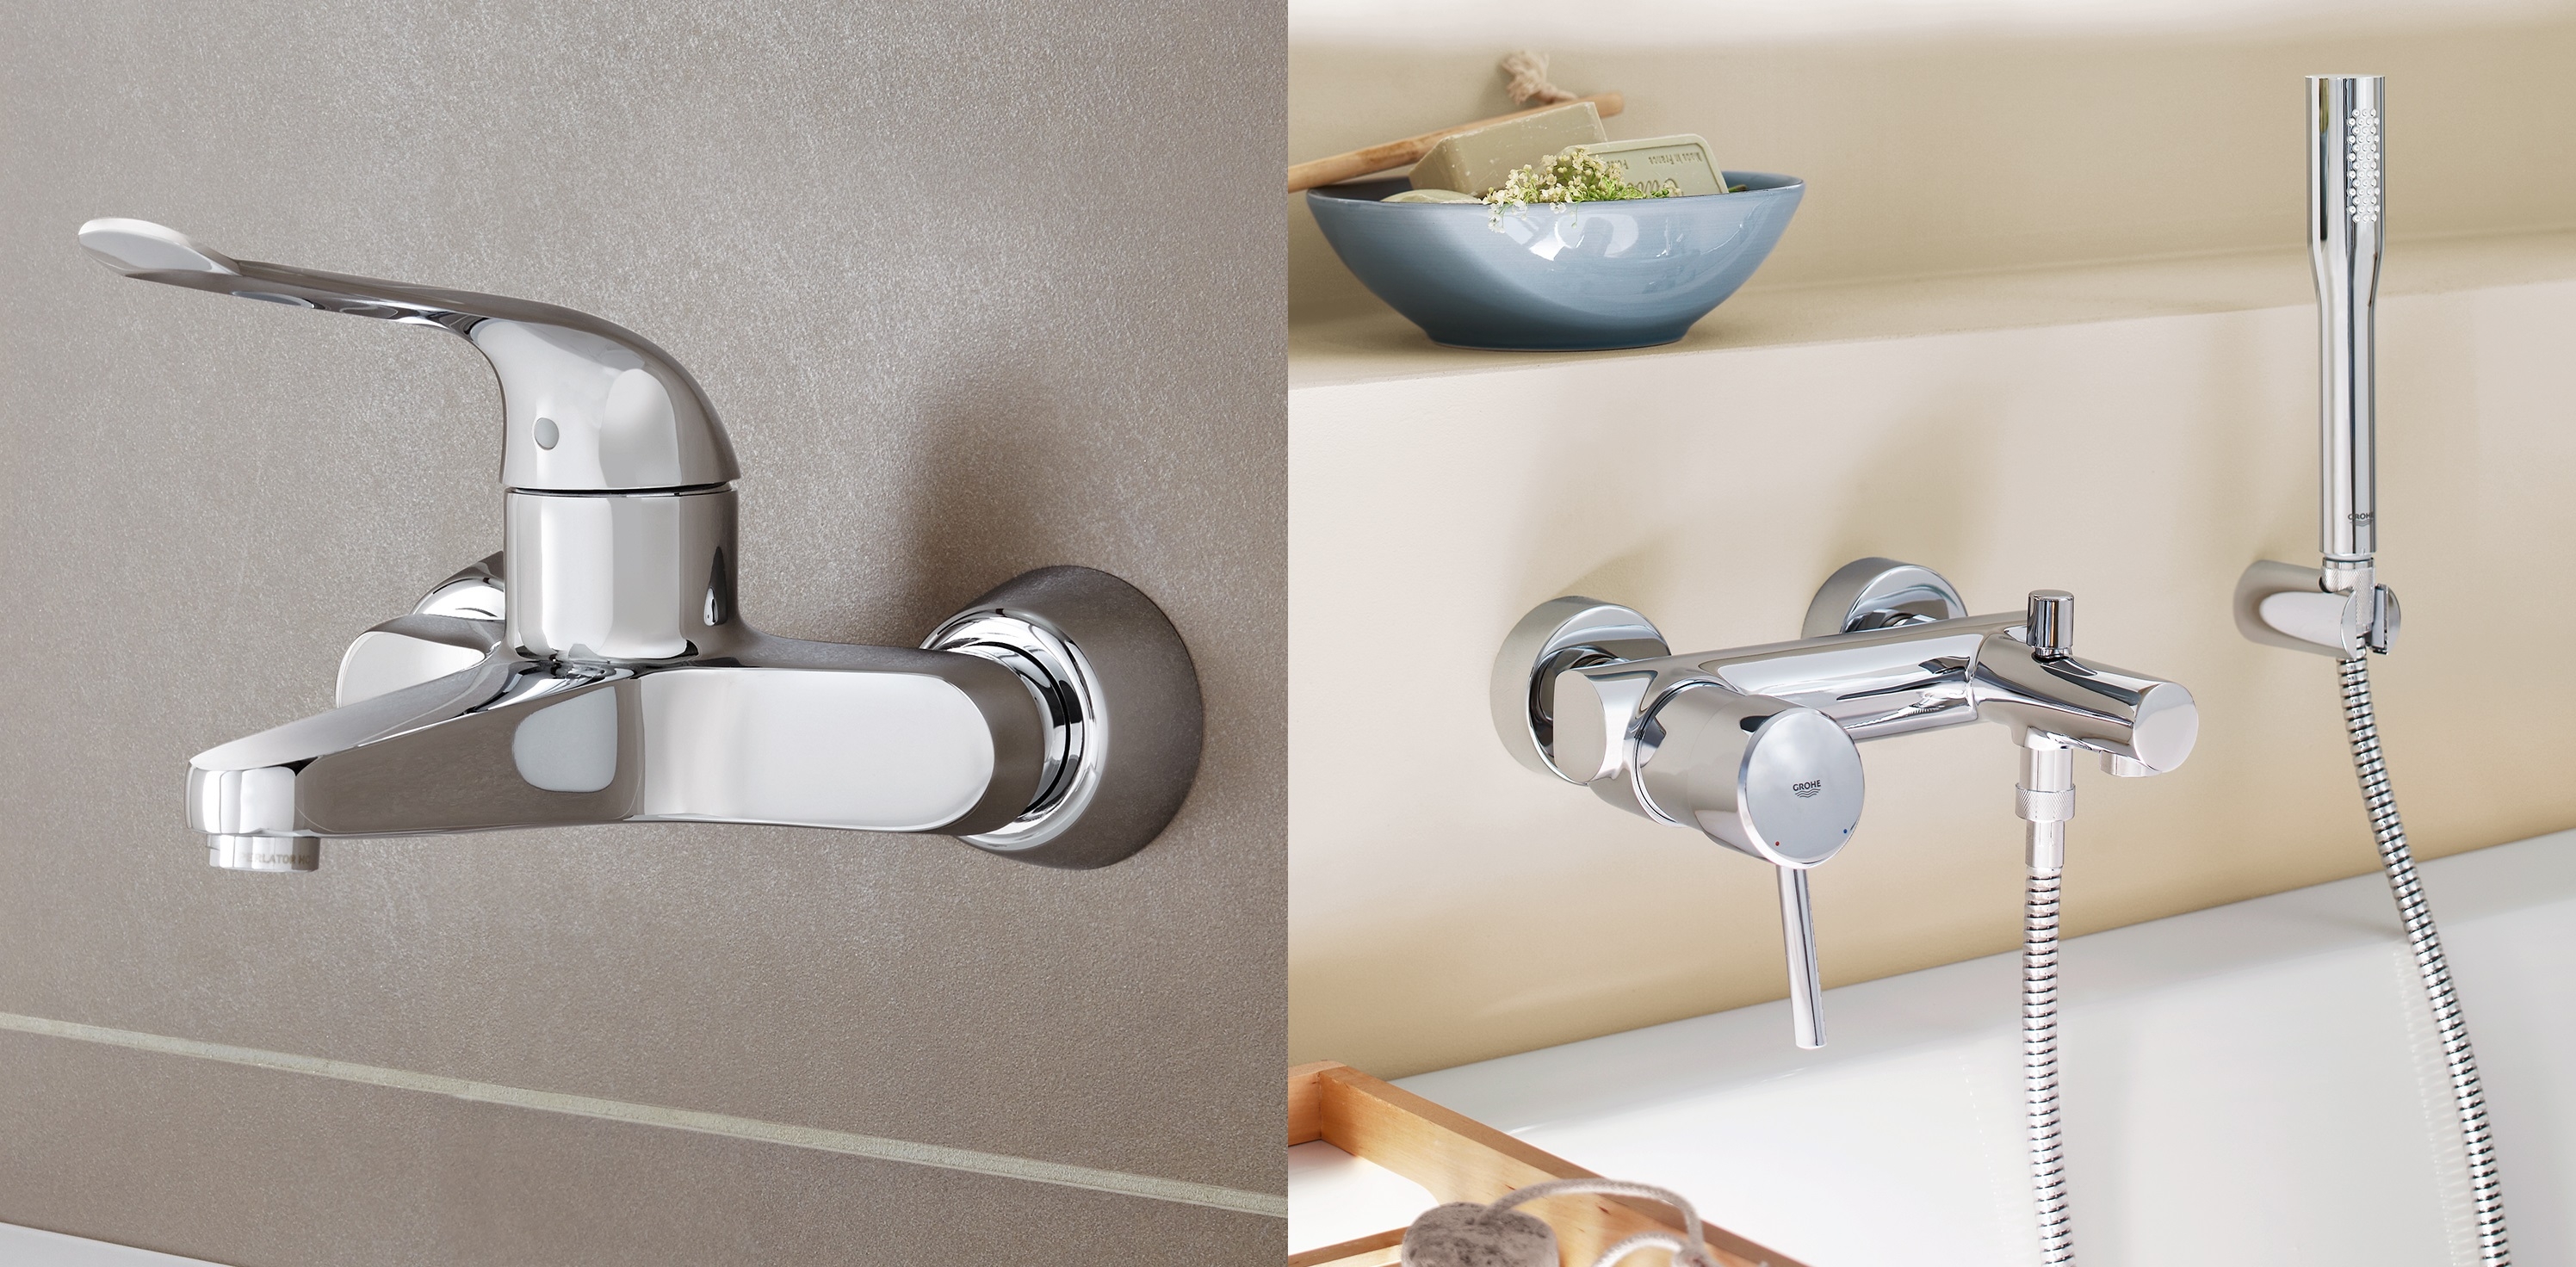 Wall-Mounted Bathtub Taps from GROHE